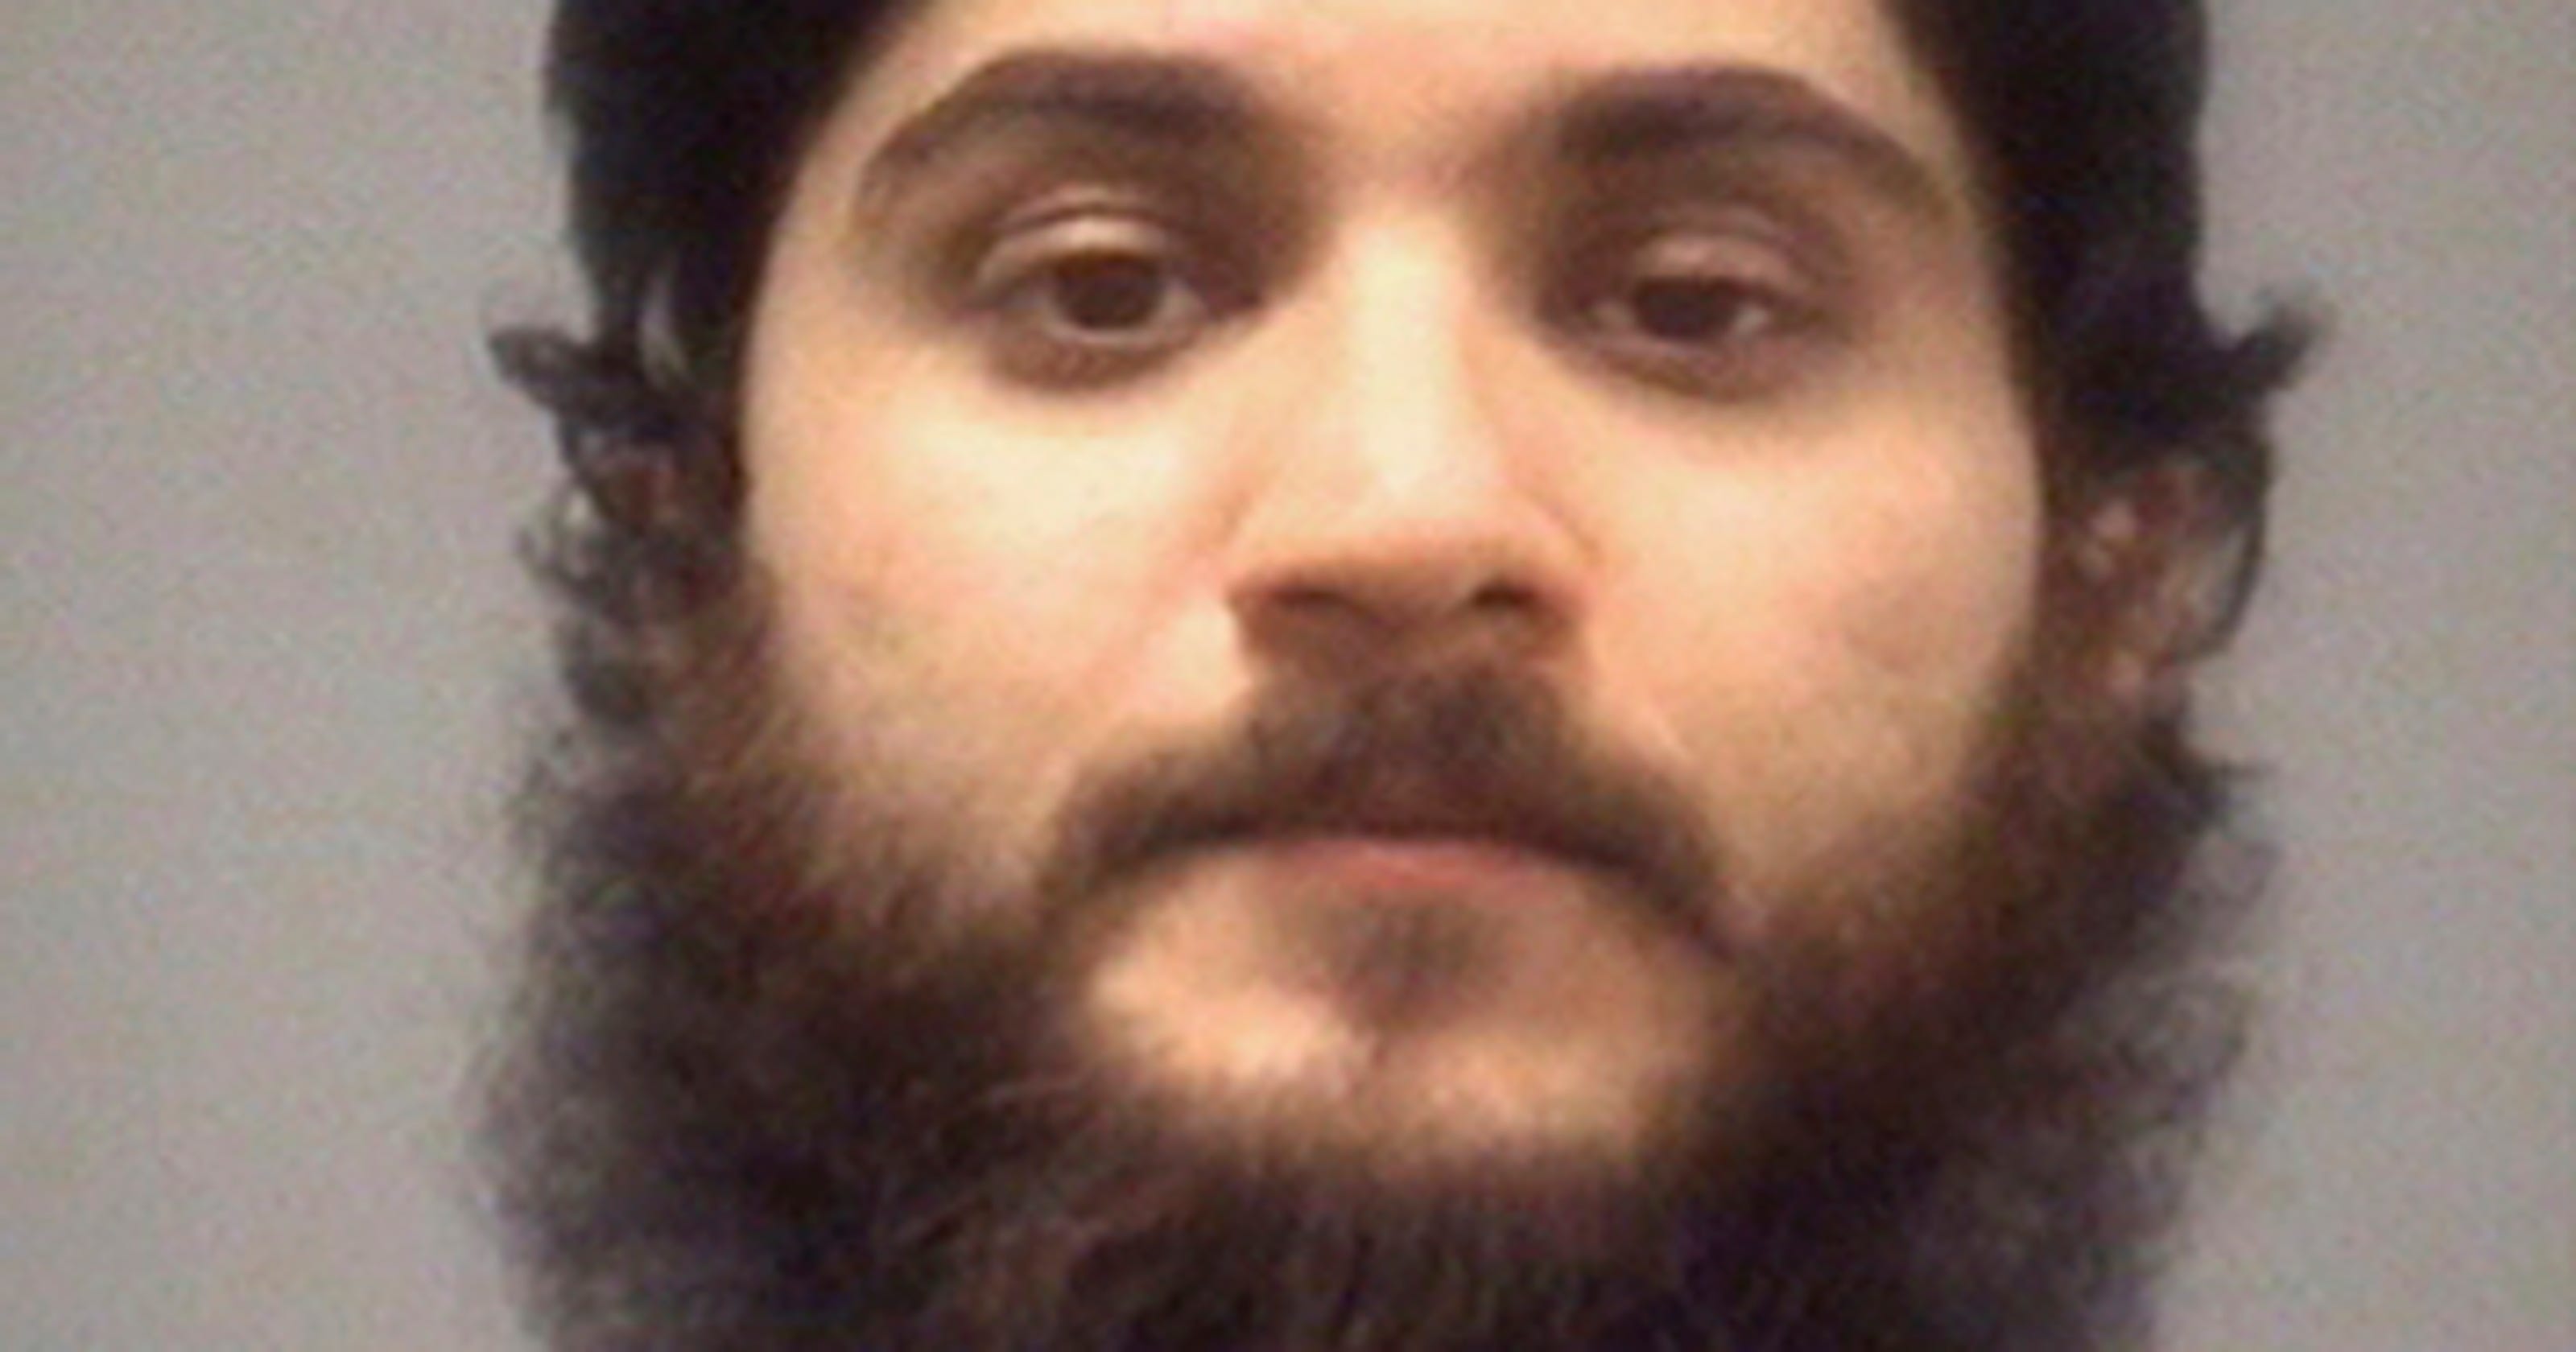 North Carolina Man Sentenced for Providing Material Support to a Foreign Terrorist Organization